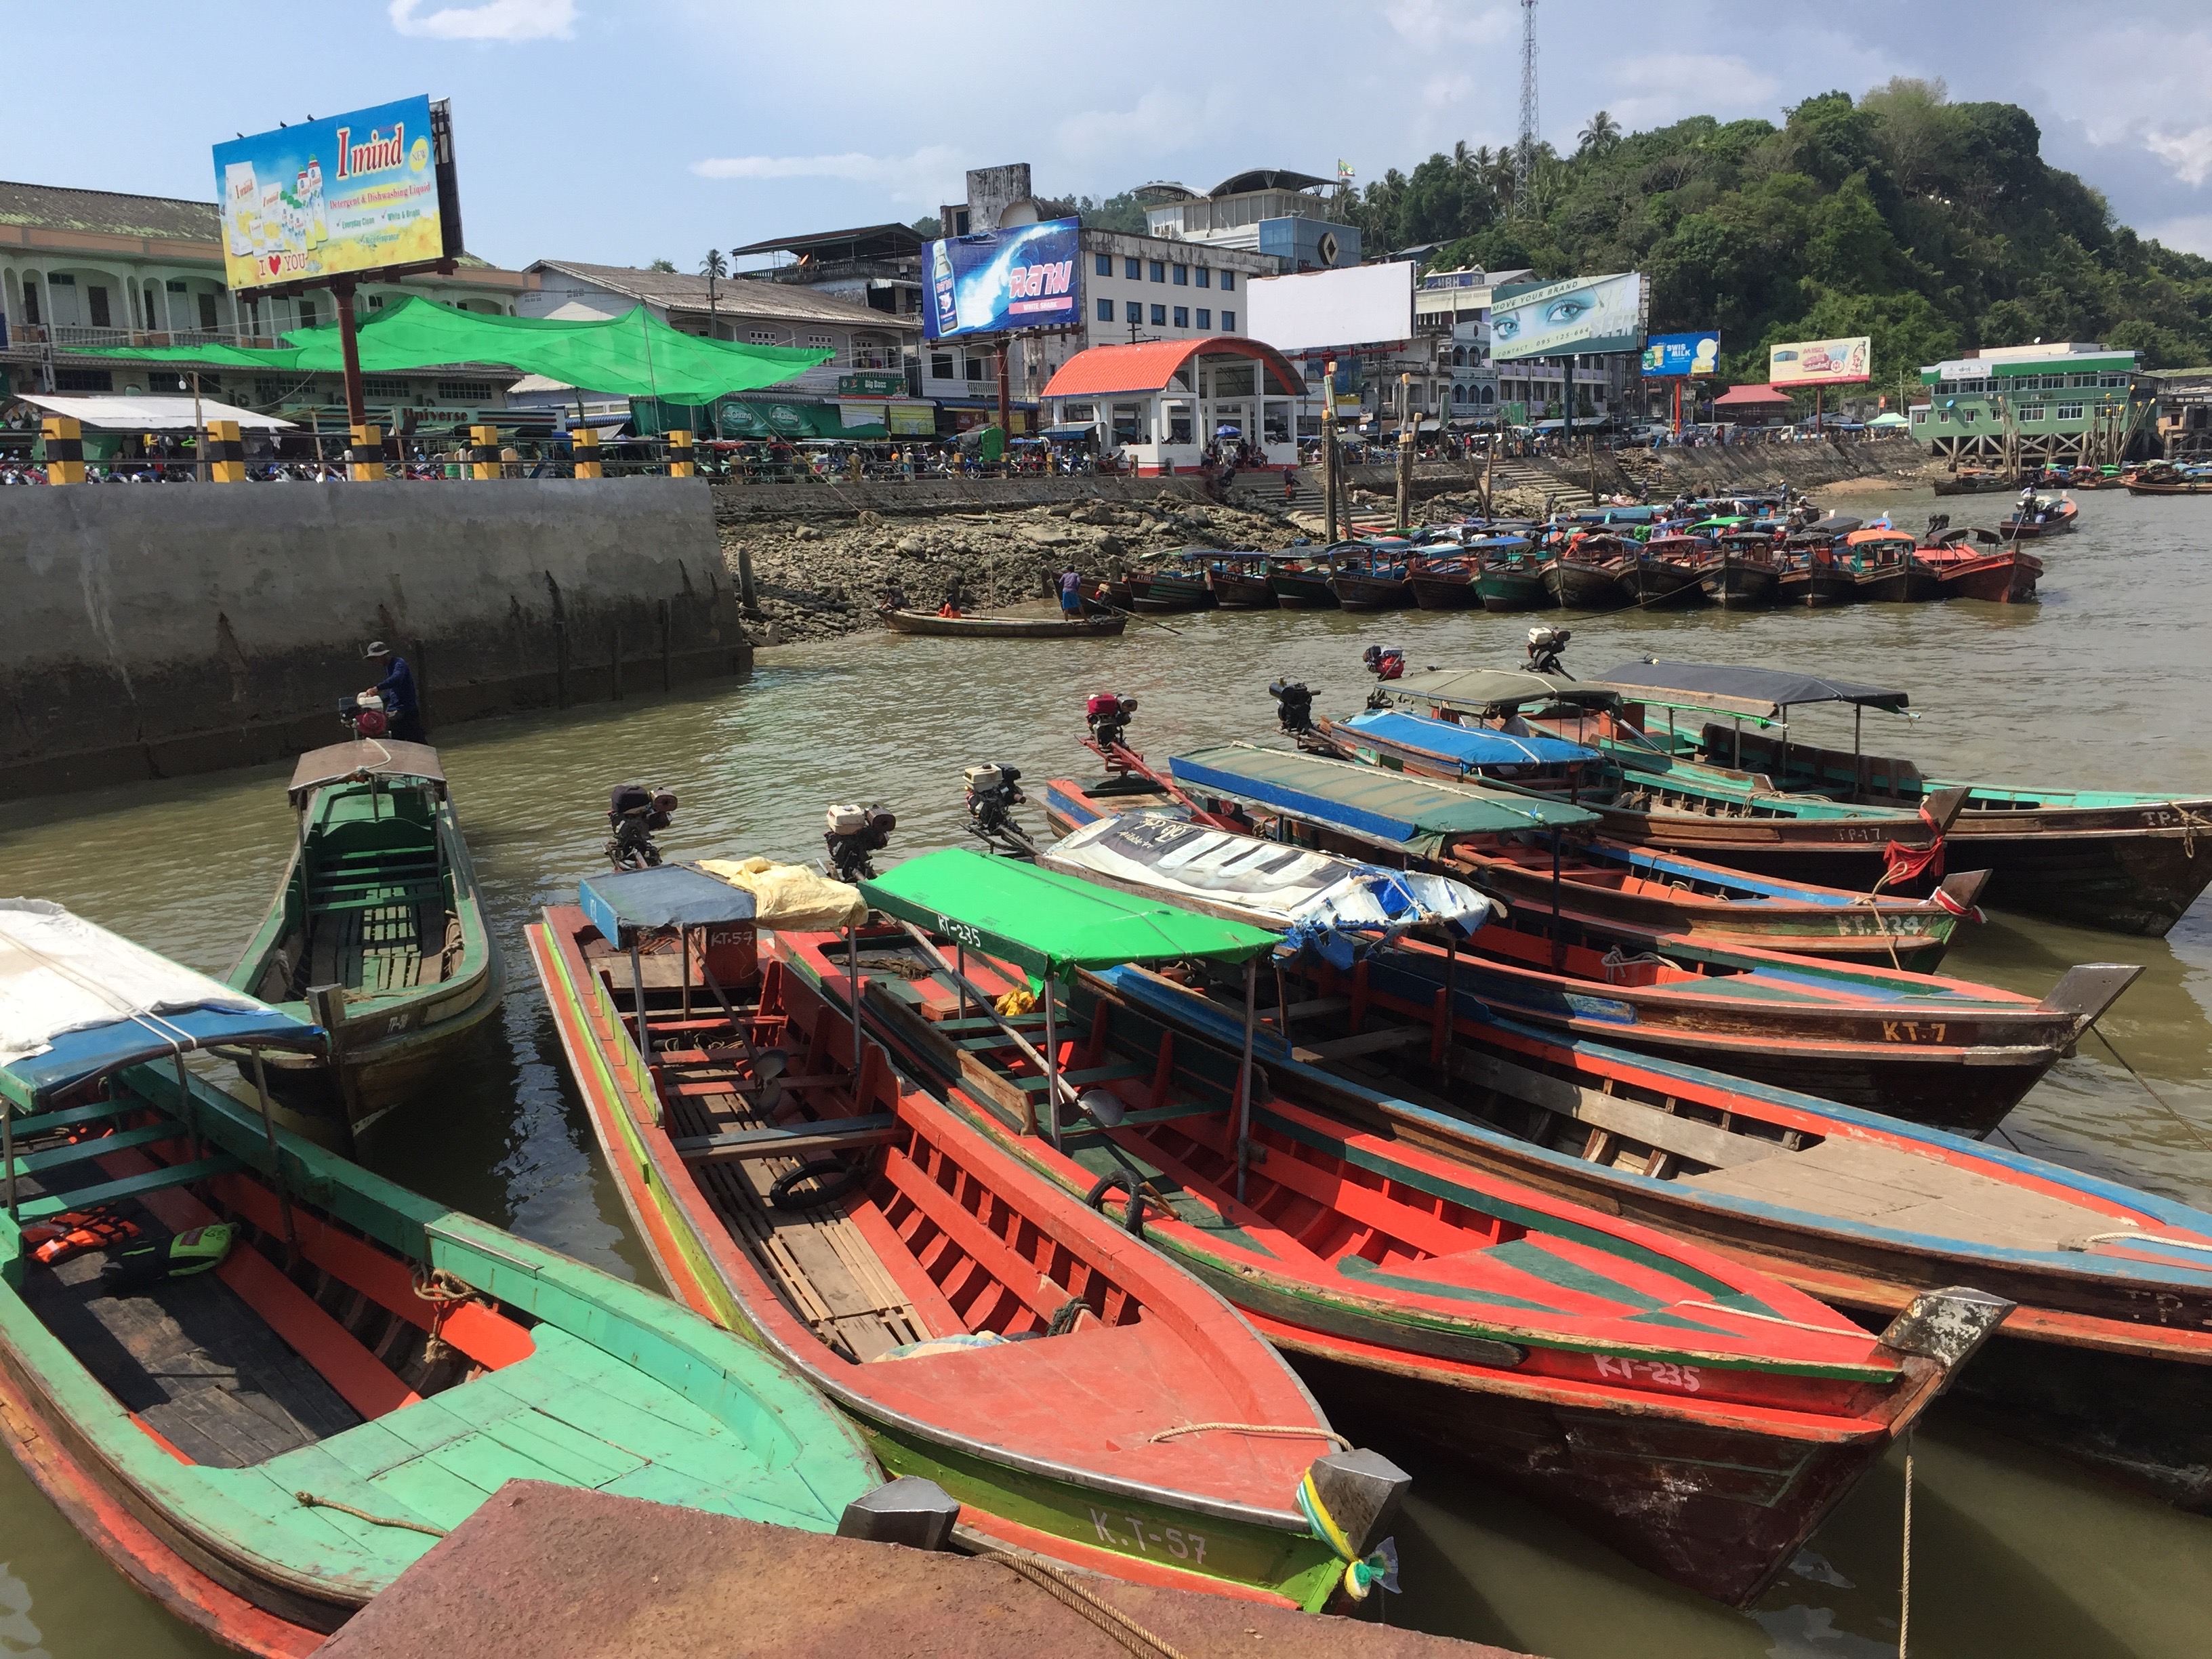 A line of longtail boats used to ferry passengers from the Thailand-Myanmar boarder. (Andrew Saw)